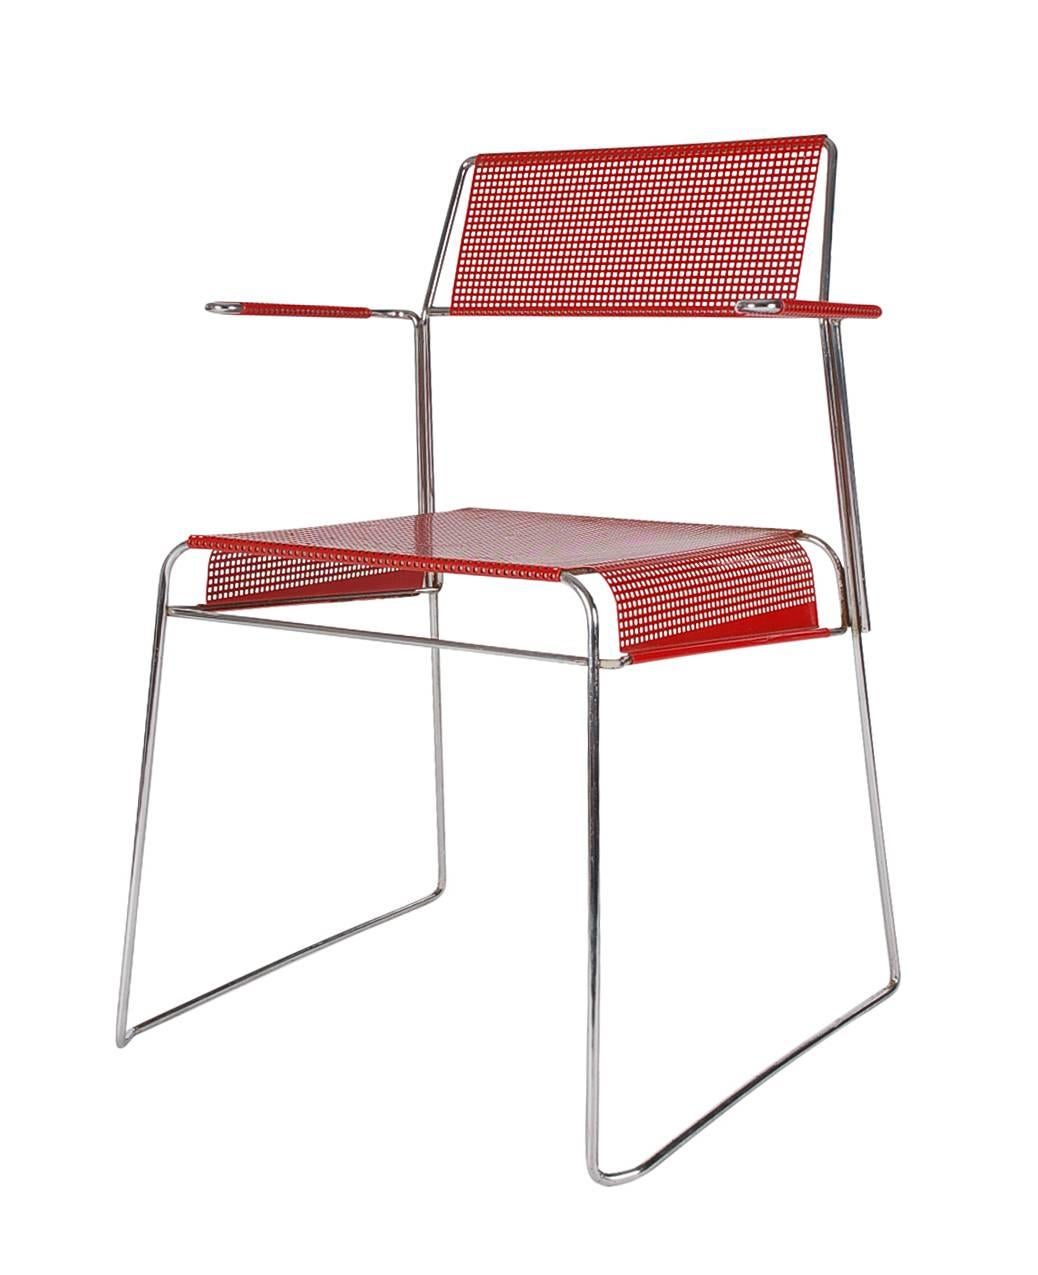 A cool and hip matching set of mesh dining chairs produced in Holland in the 1970s. These feature chrome-plated steel frames with red enameled seats, backs, and armrests.